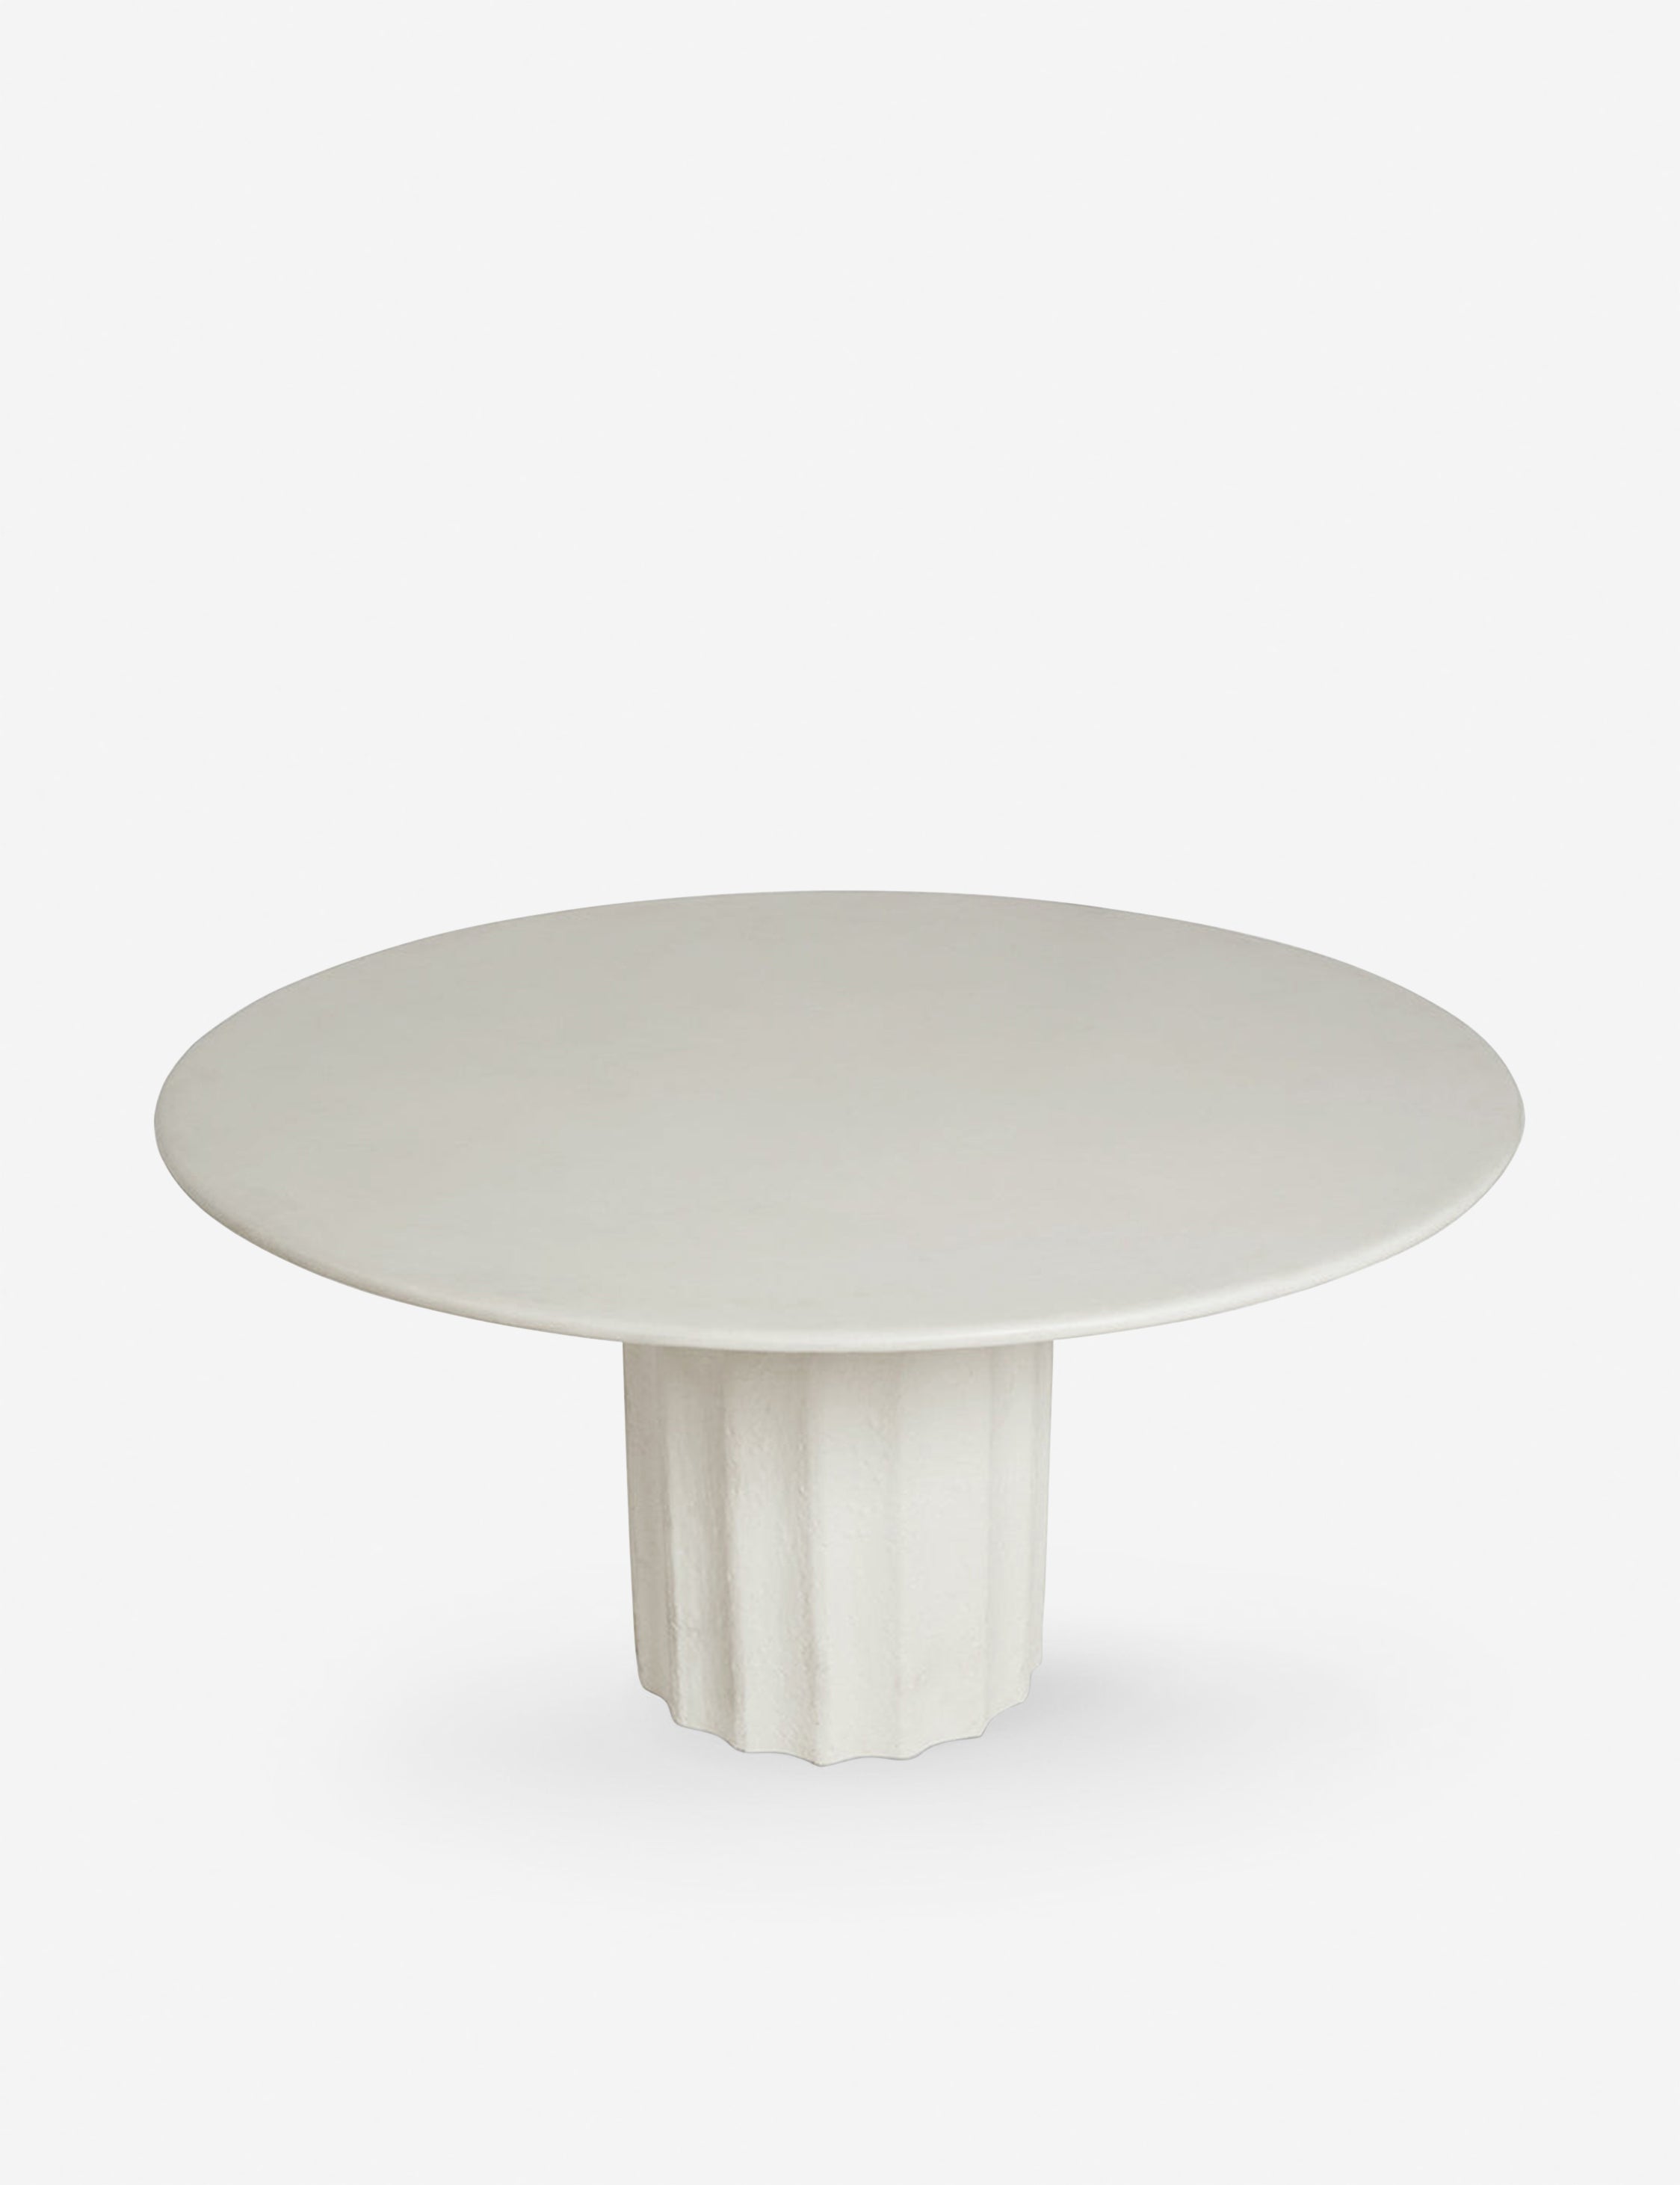 Downward view of the Doric white round dining table